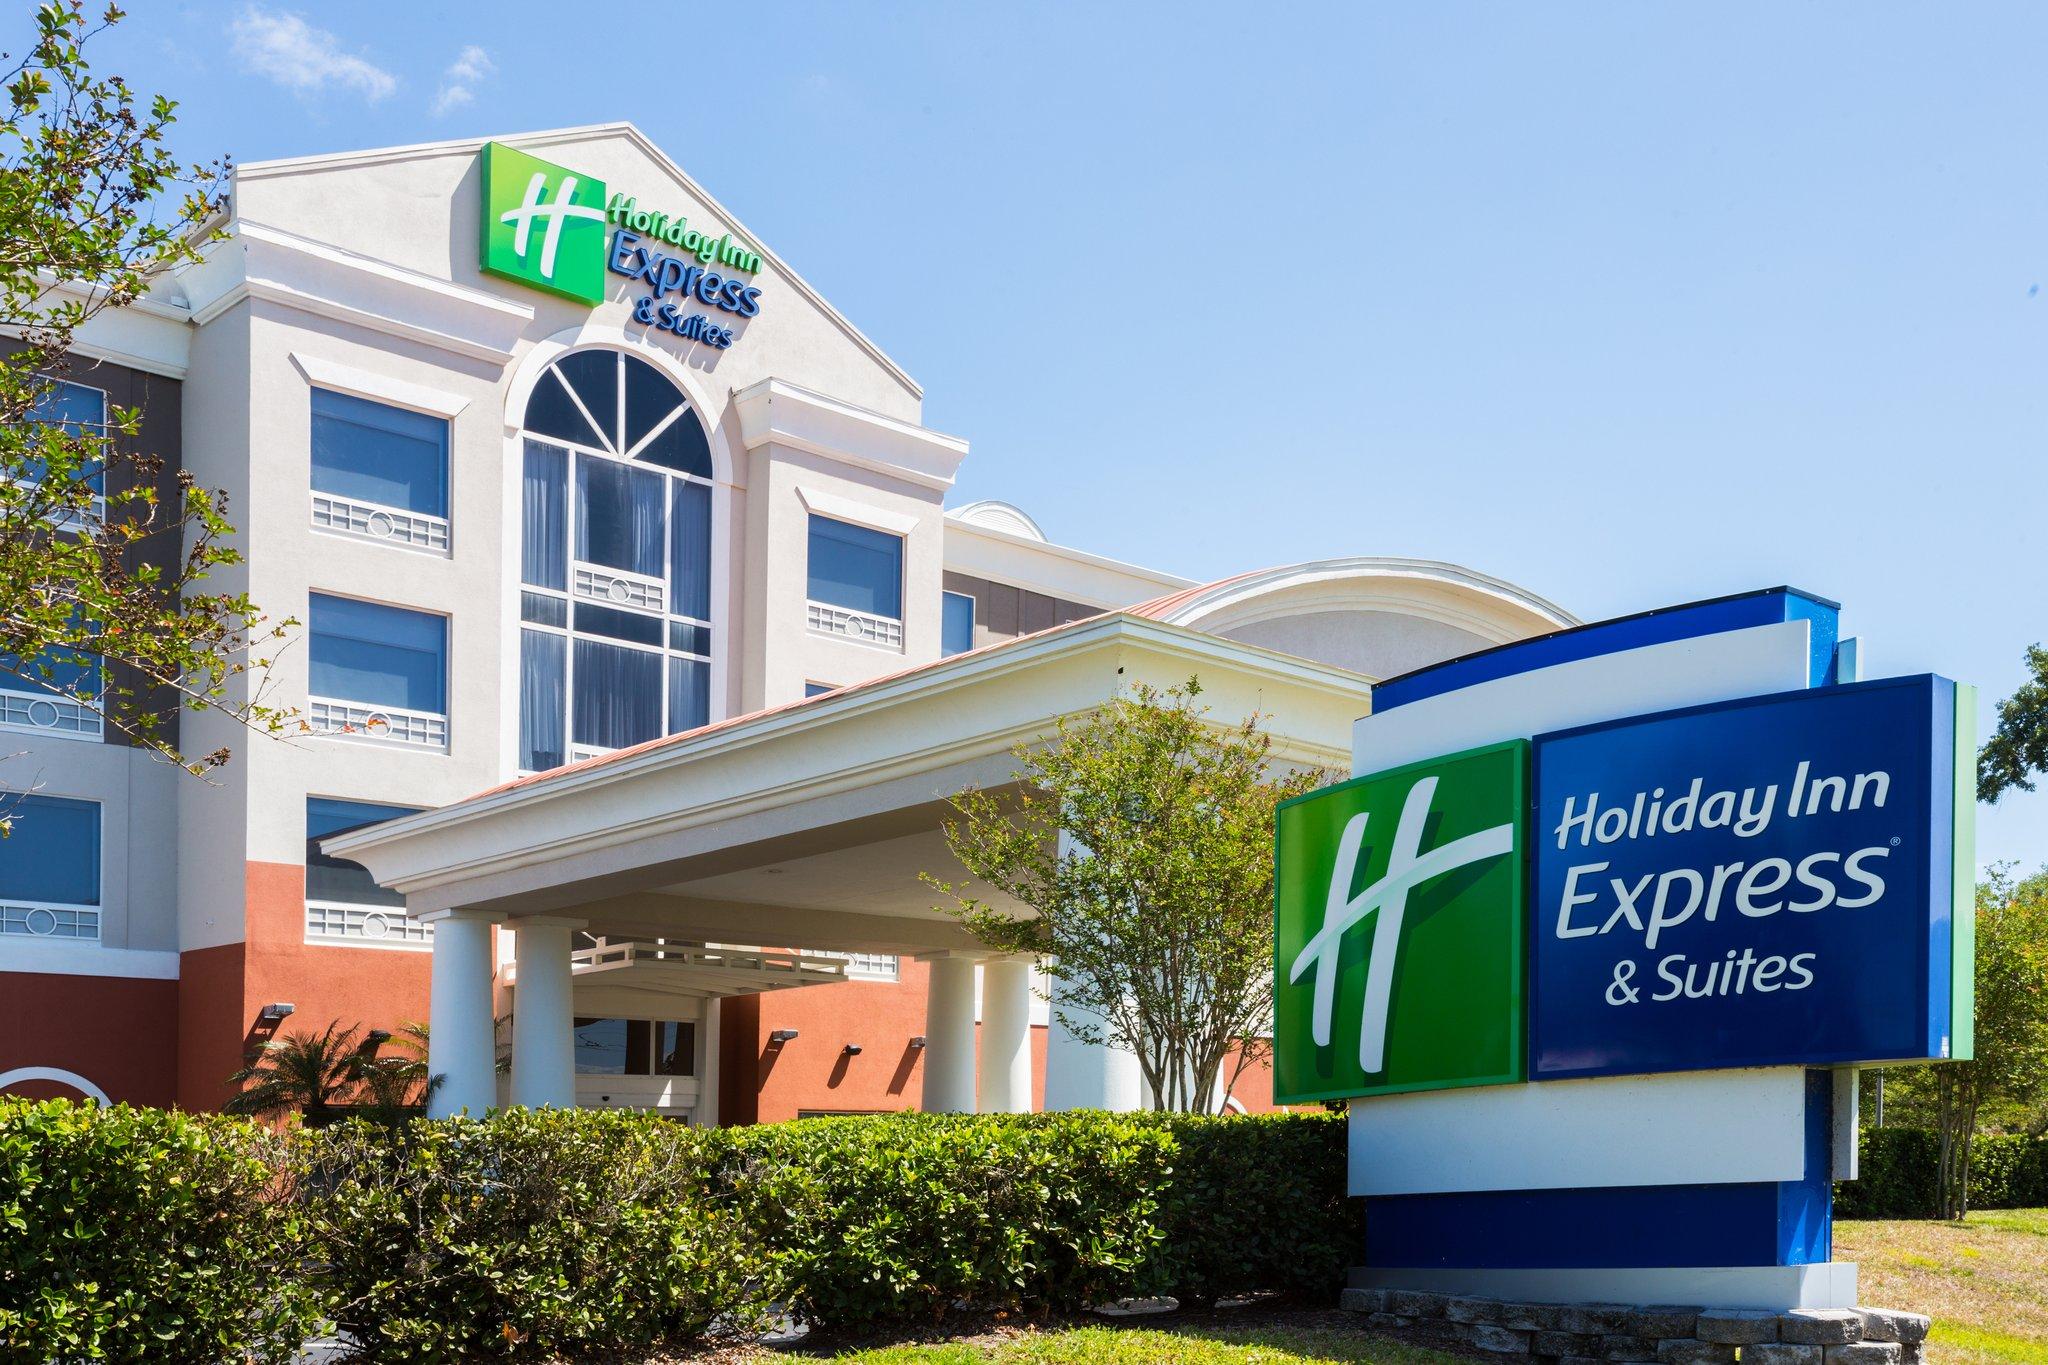 Holiday Inn Express Hotel & Suites Tampa-Fairgrounds-Casino in Tampa, FL